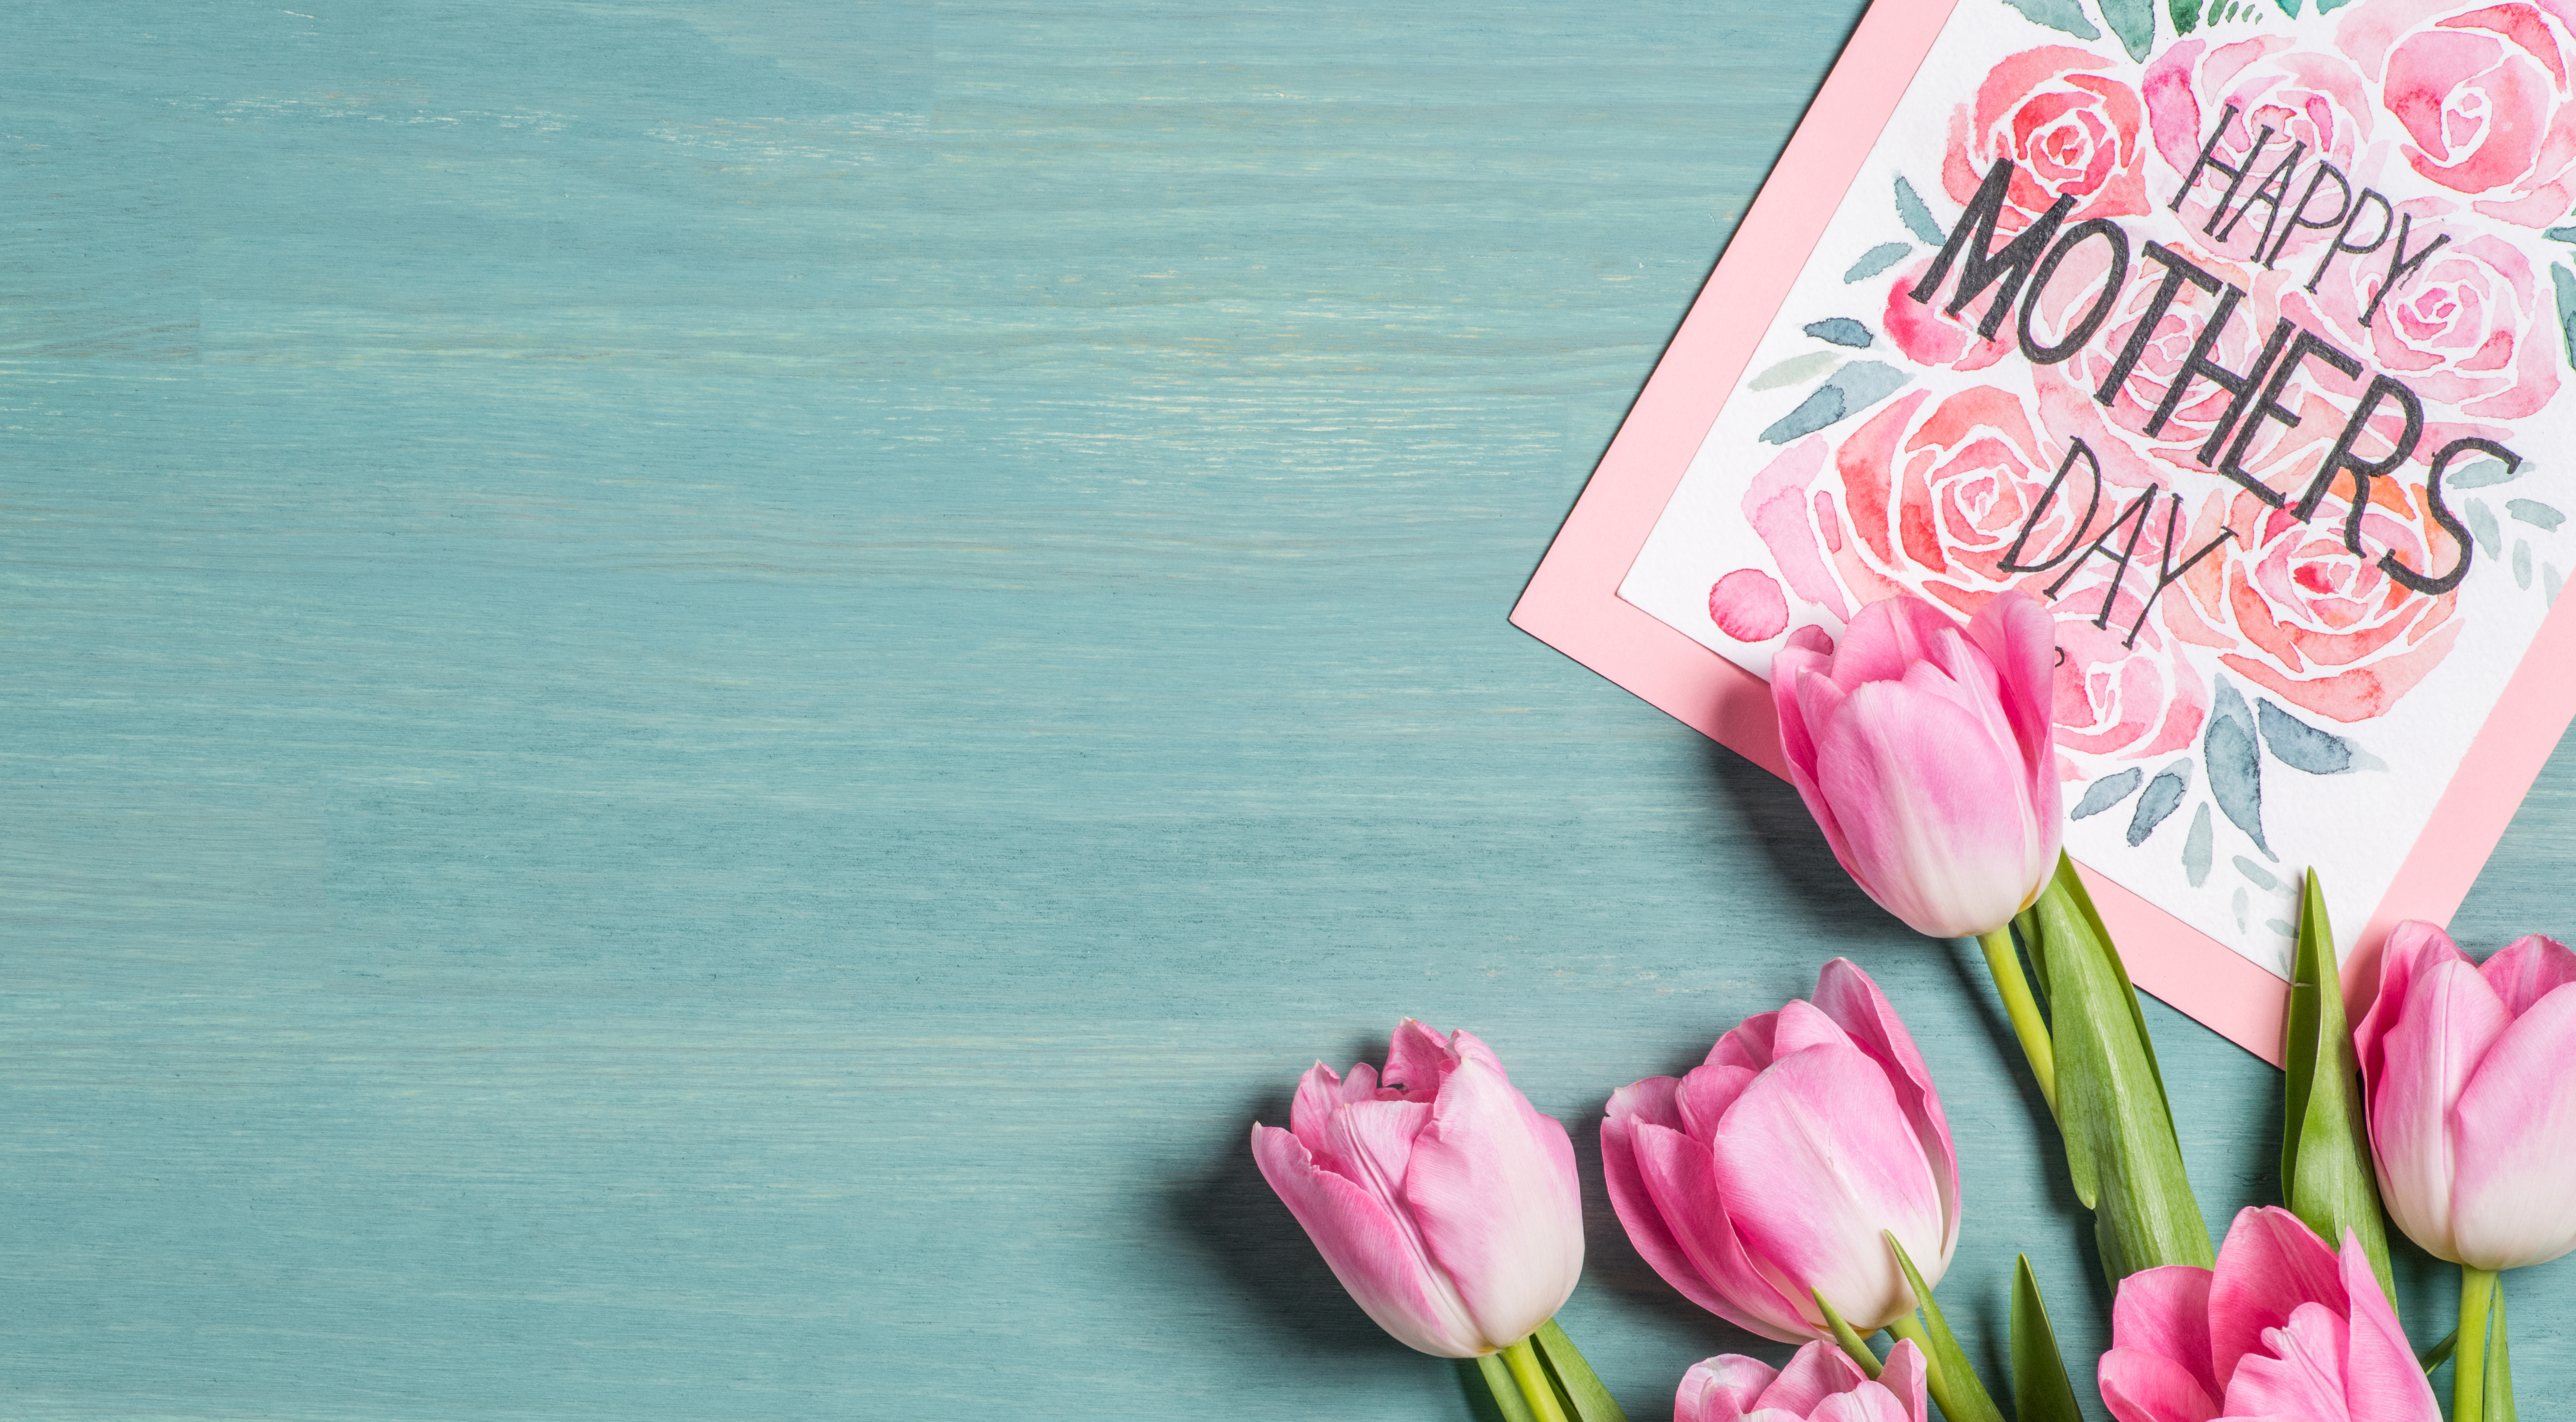 Pink tulips and a Happy mother's day card on a teal background